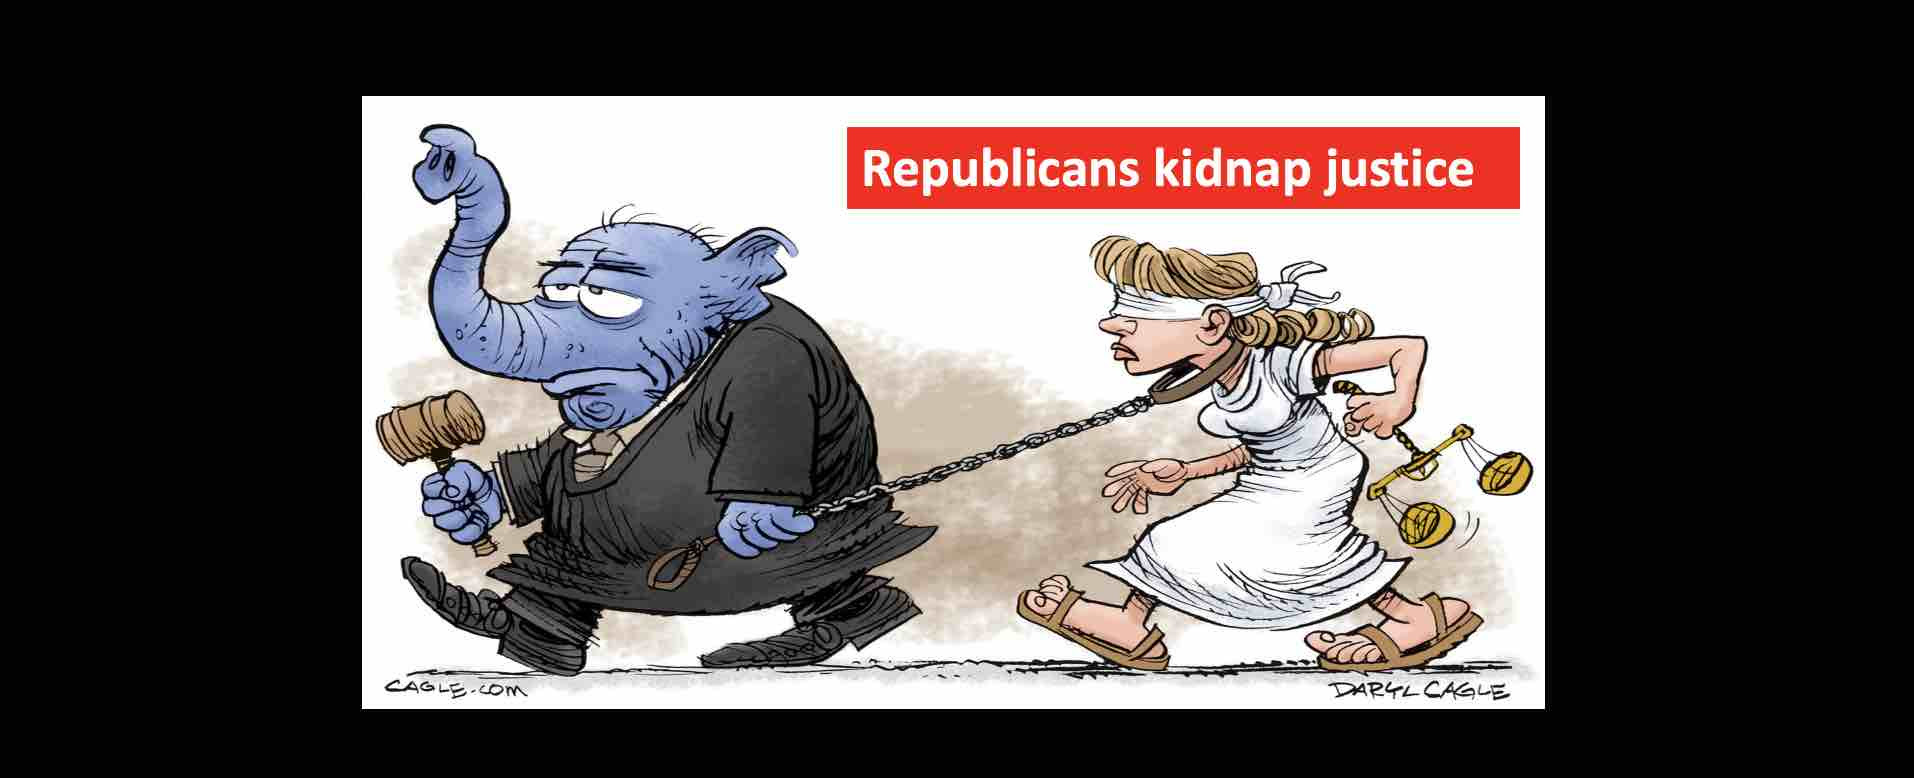 Republicans kidnap justice by packing the courts with ultra right wing justices